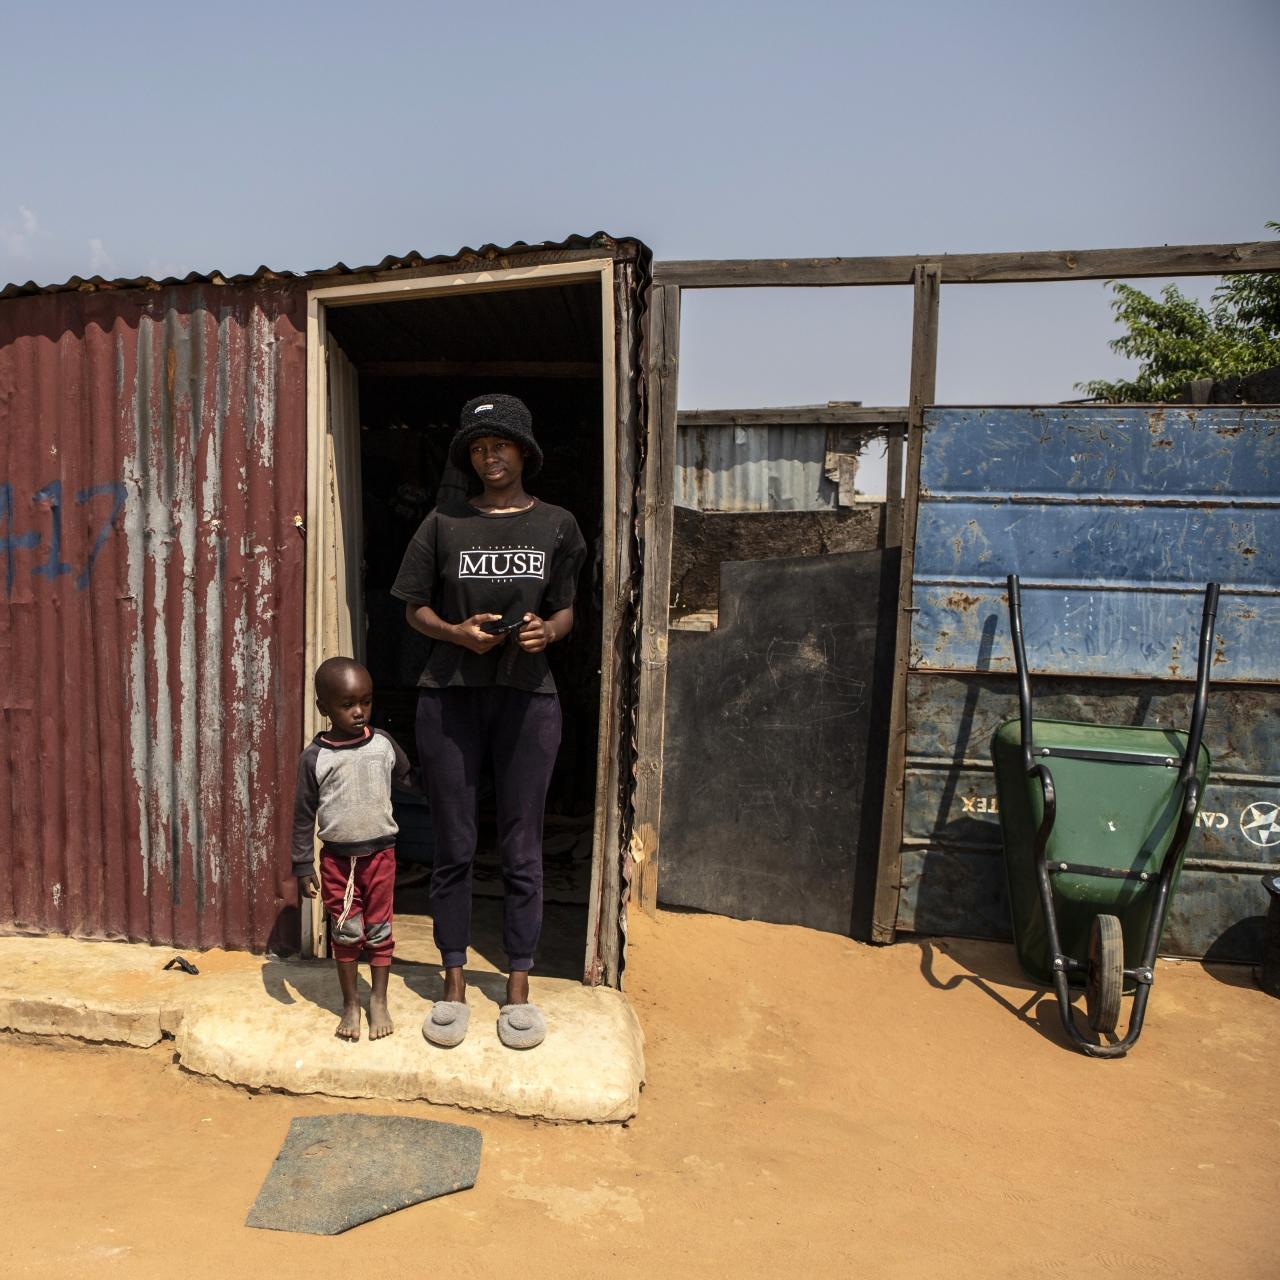 Winnie, a young women in a black bucket hat and black t-shirt stands next to young boy (her son) in the doorway of a small corrugated iron house